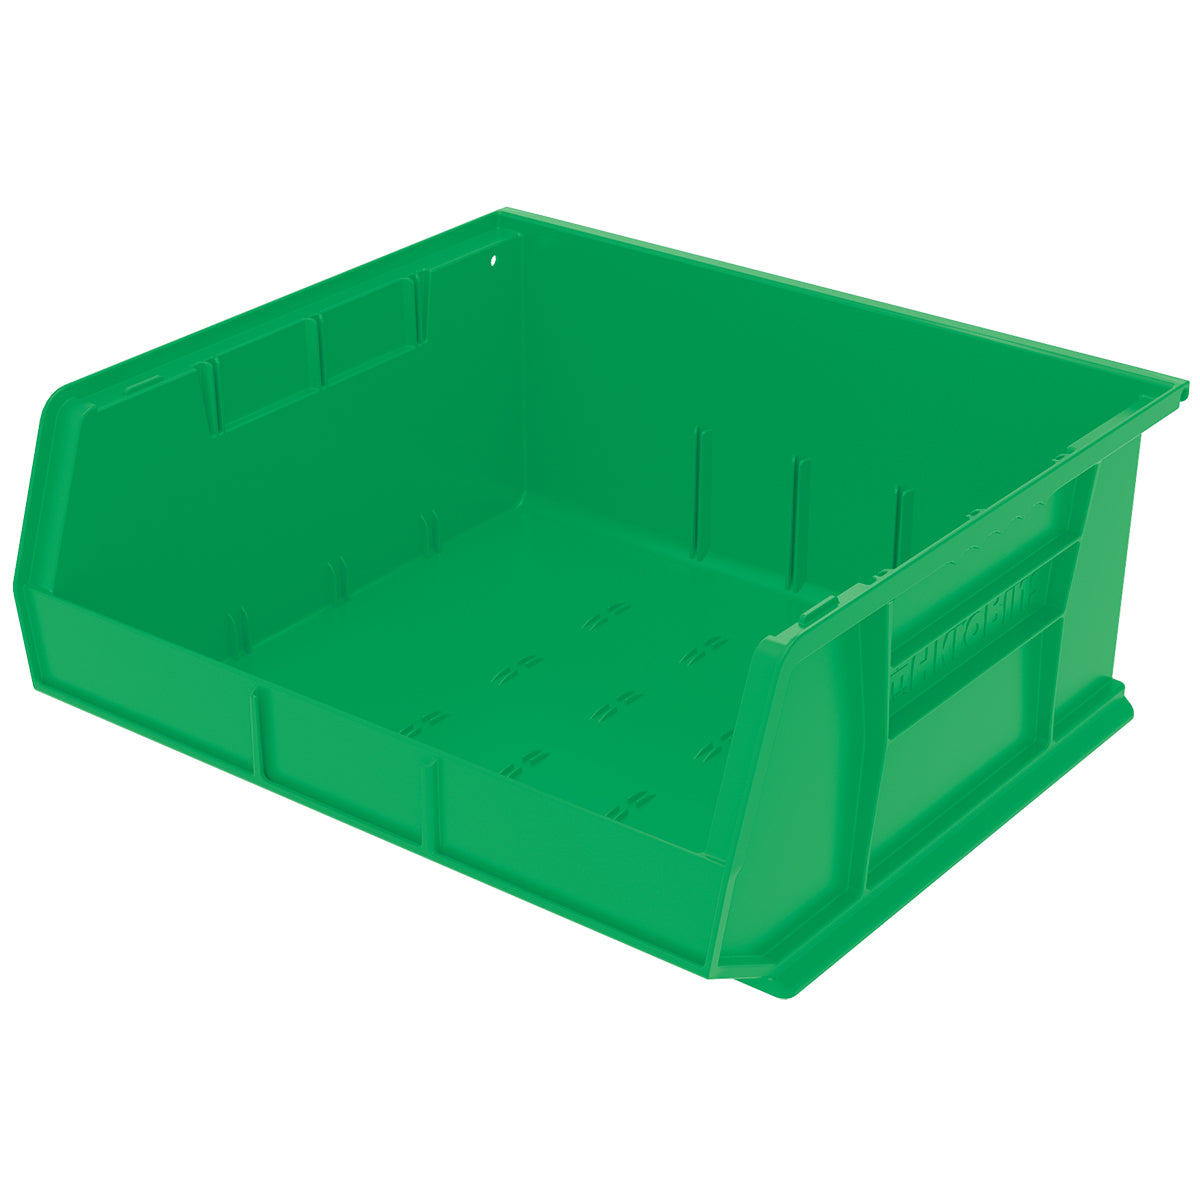 Akro-Mils (6 Pack) 30250 Plastic Stackable Storage AkroBin Hanging Container